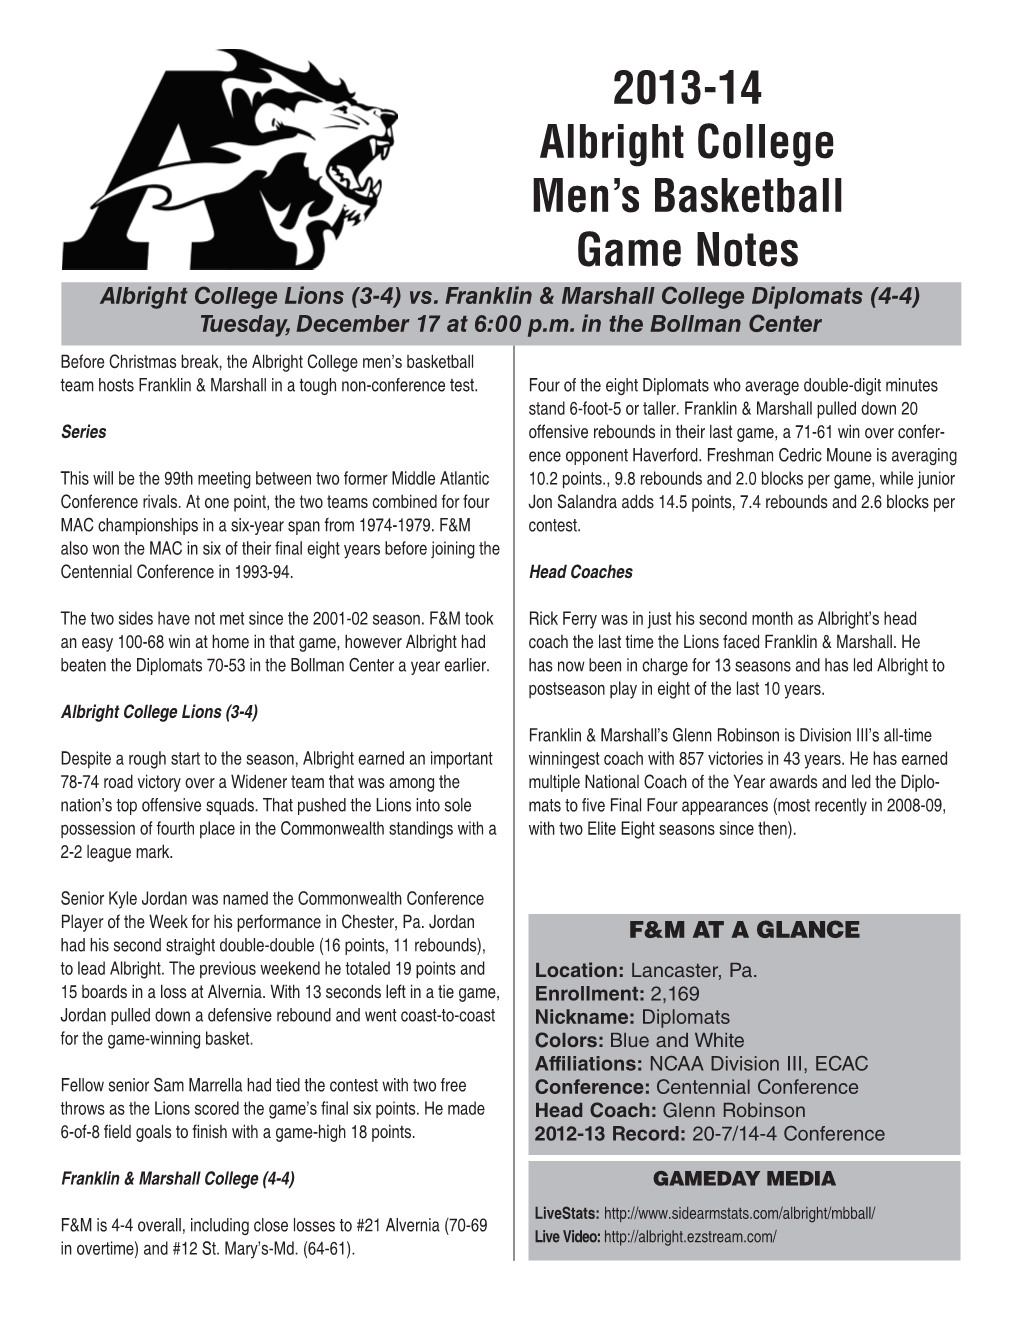 2013-14 Albright College Men's Basketball Game Notes